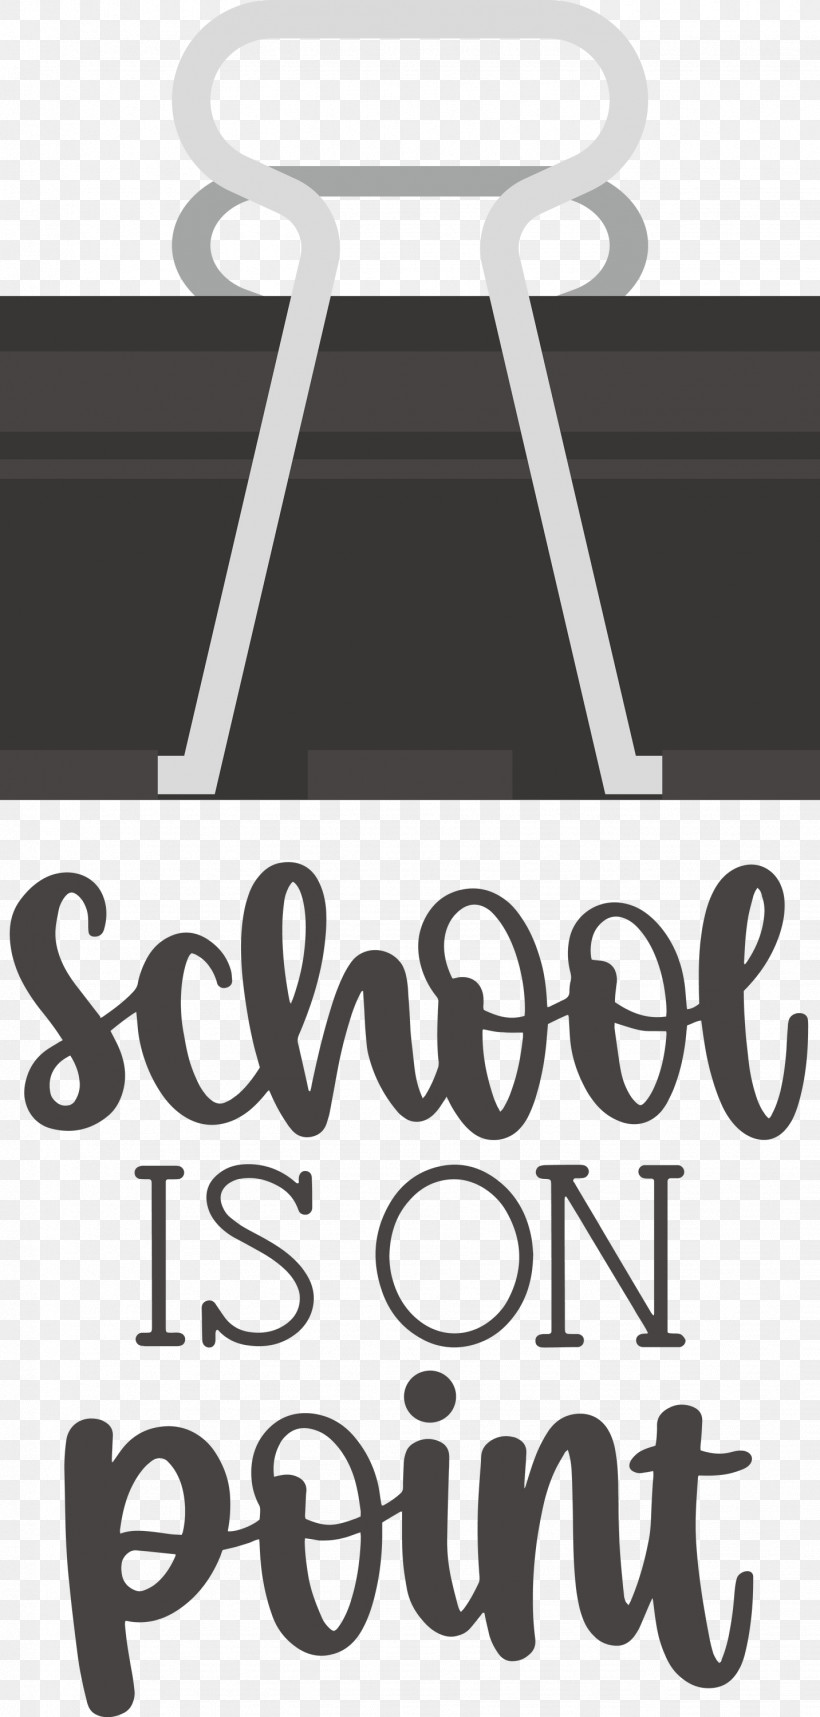 School Is On Point School Education, PNG, 1432x3000px, School, Black, Black And White, Education, Logo Download Free